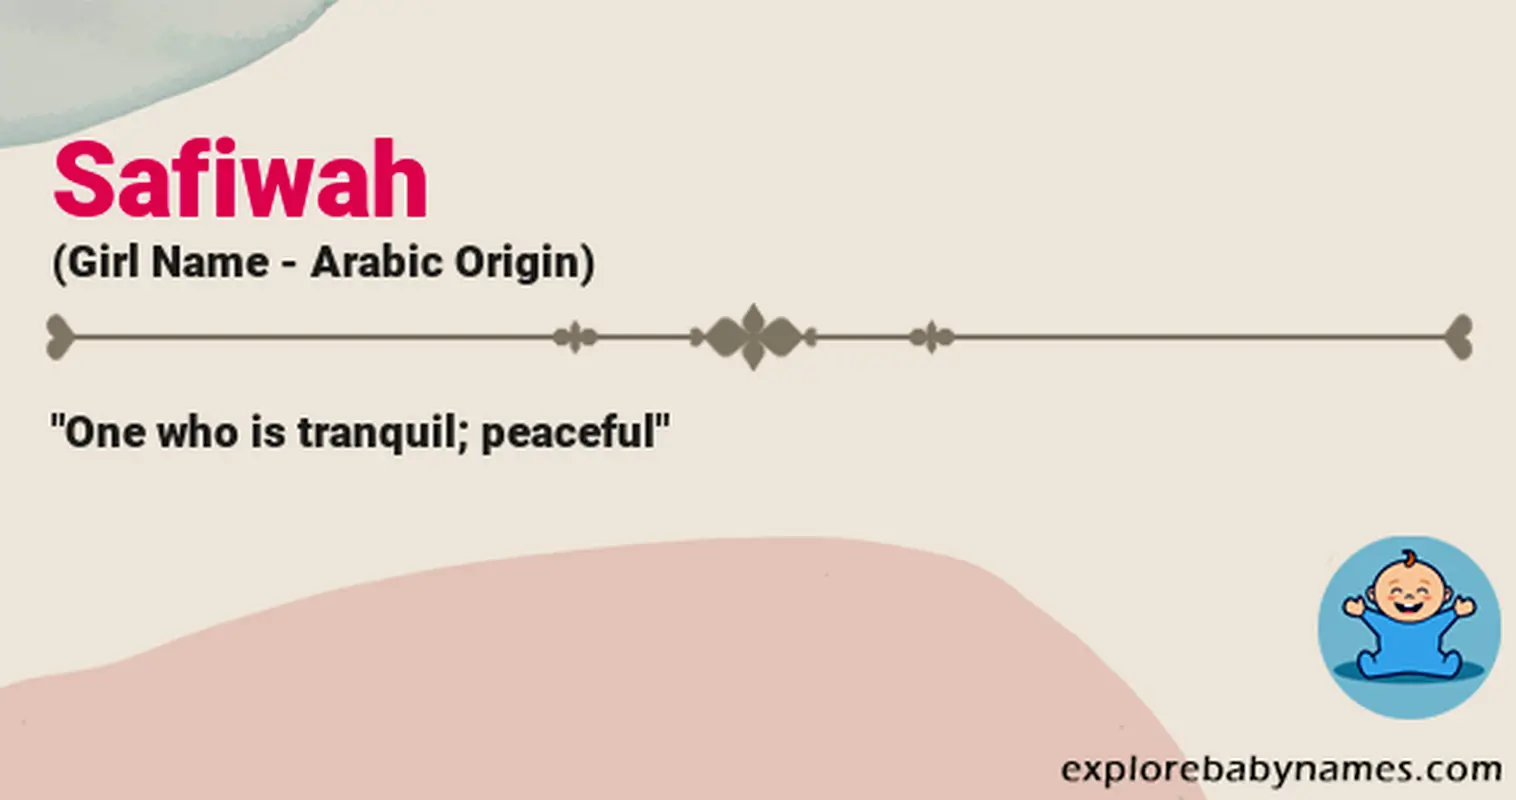 Meaning of Safiwah